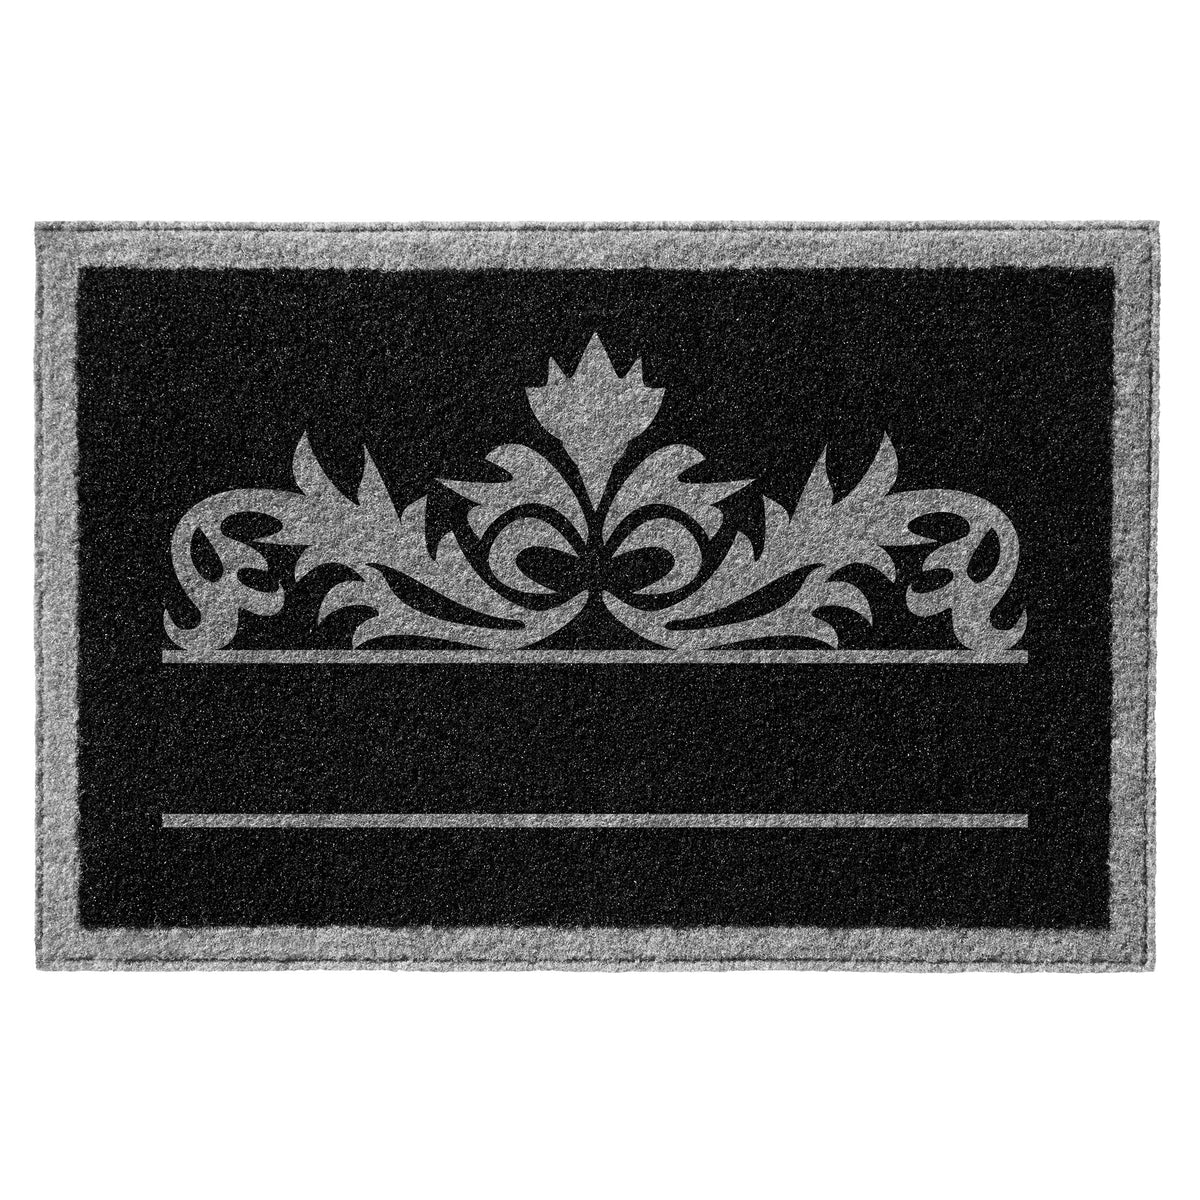 Infinity Custom Mats™ All-Weather Personalized Door Mat - STYLE: MURPHY COLOR: BLACK / GREY - rugsthatfit.com